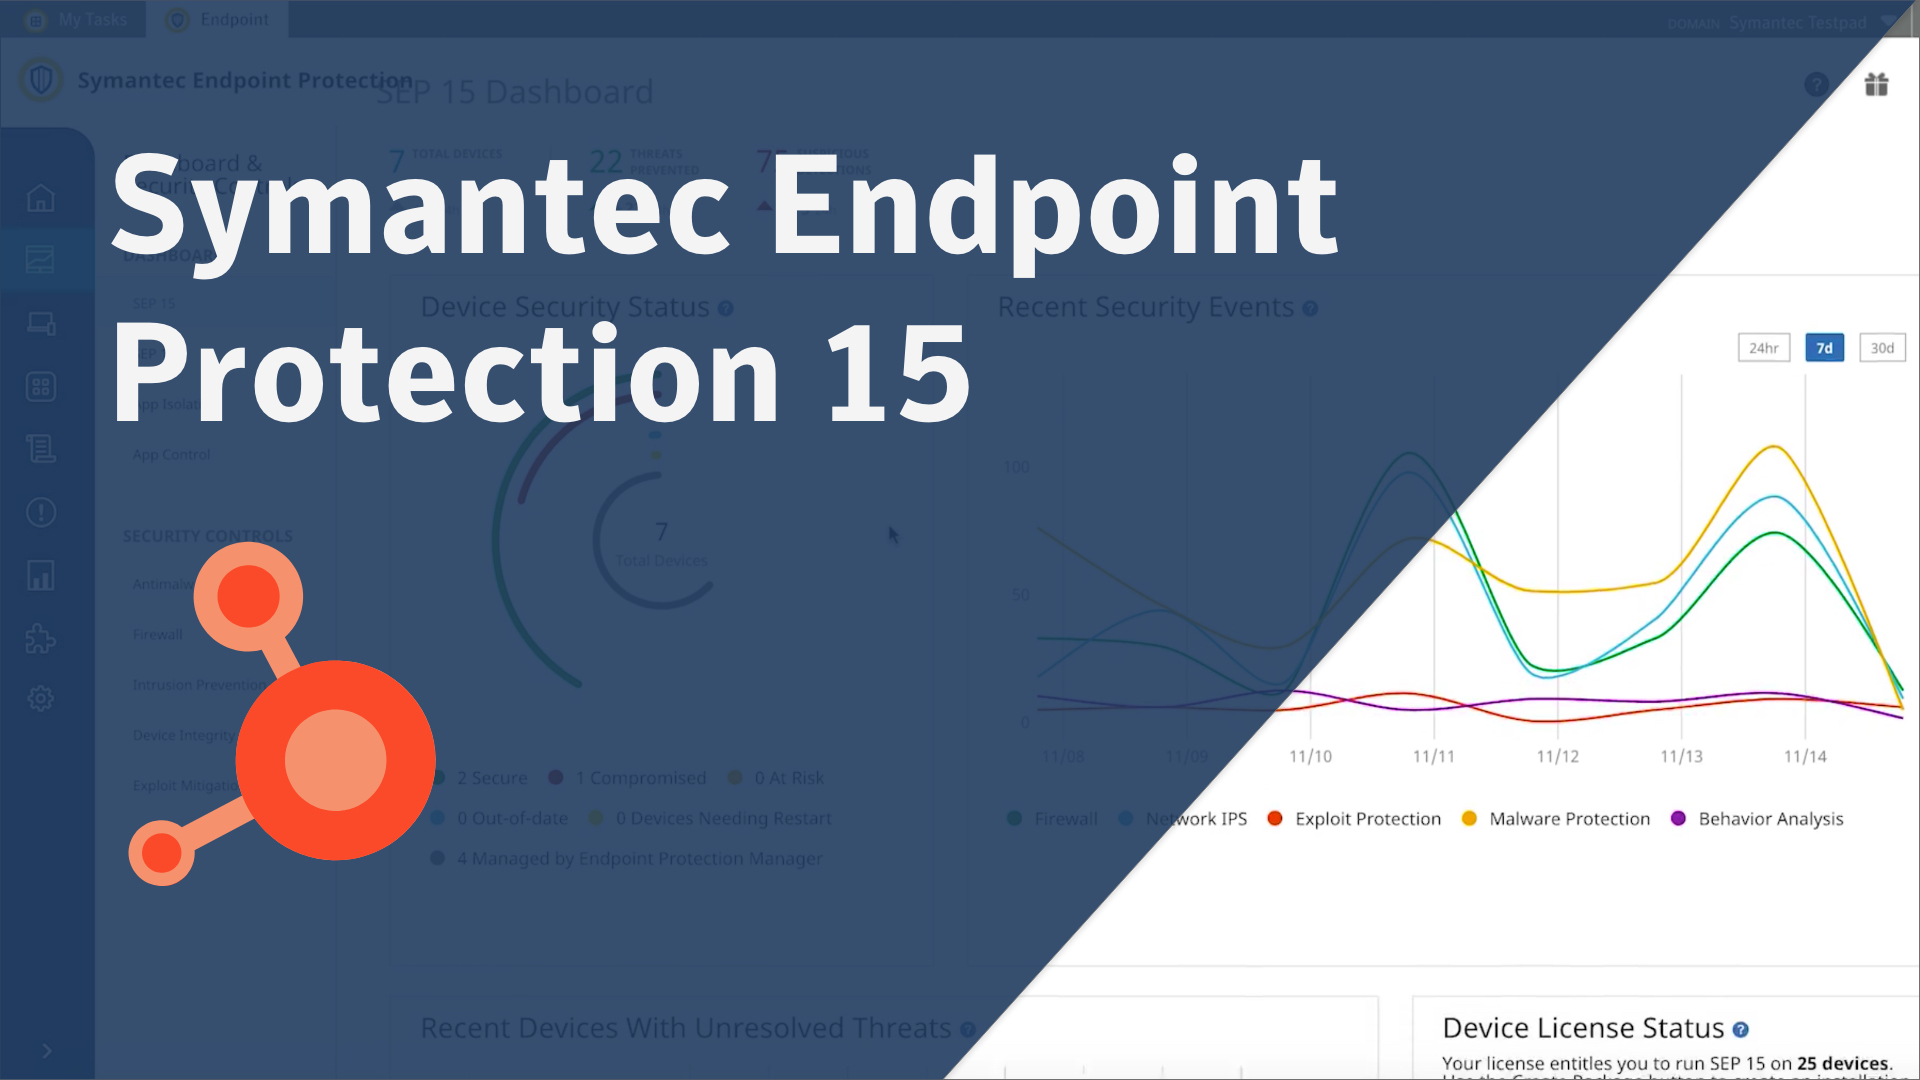 ws reputation 1 symantec endpoint protection